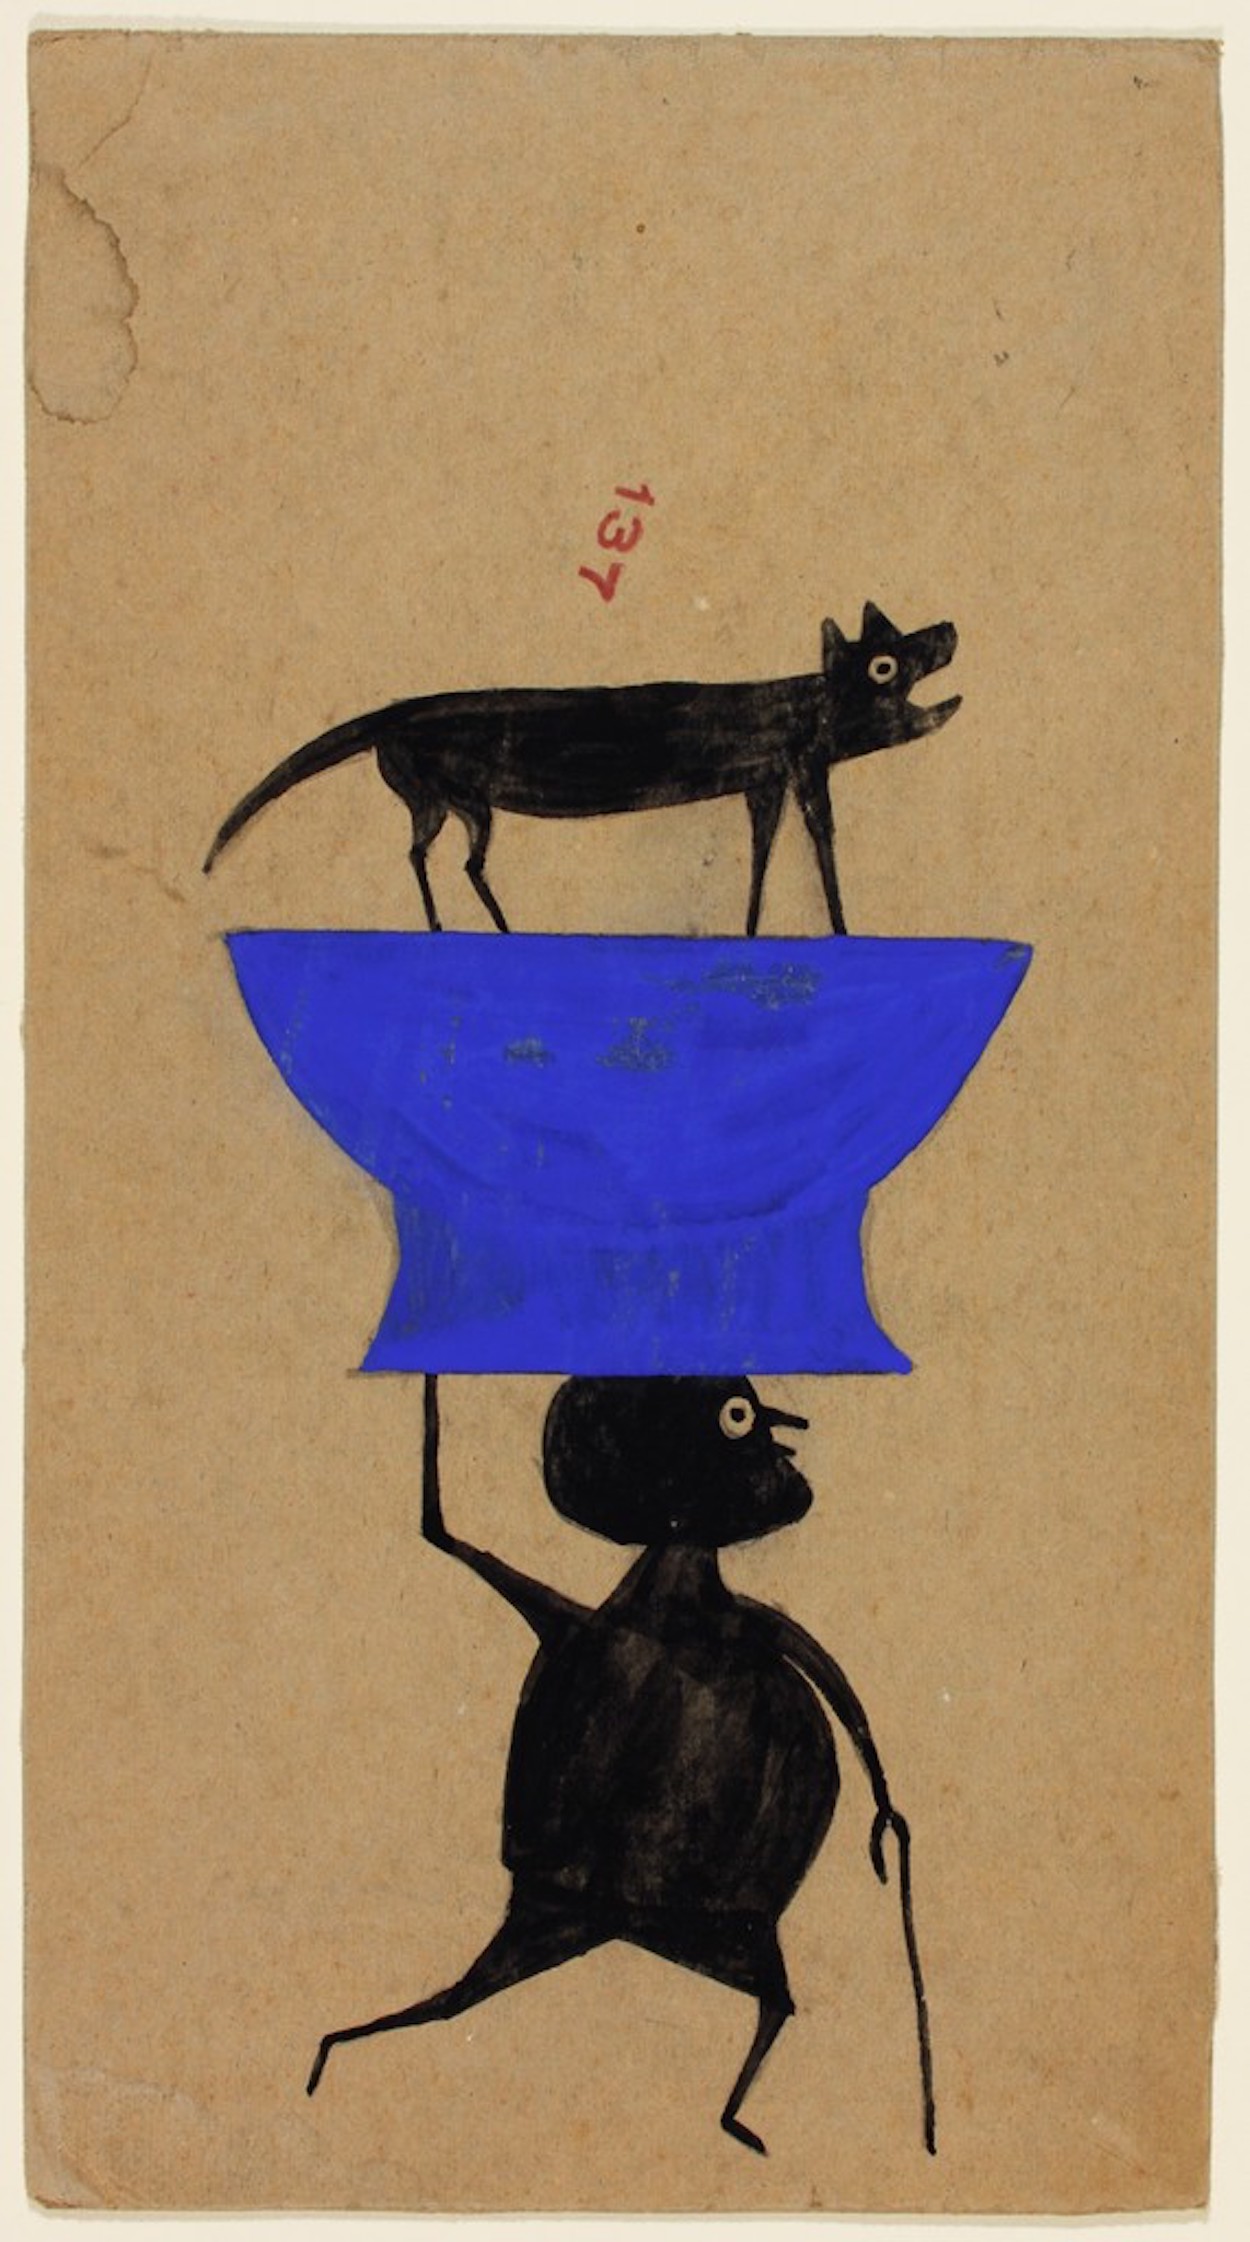 Untitled (Man Carrying Dog on Object) by Bill Traylor - c. 1939–1942 - 33.6 x 18.4 cm High Museum of Art